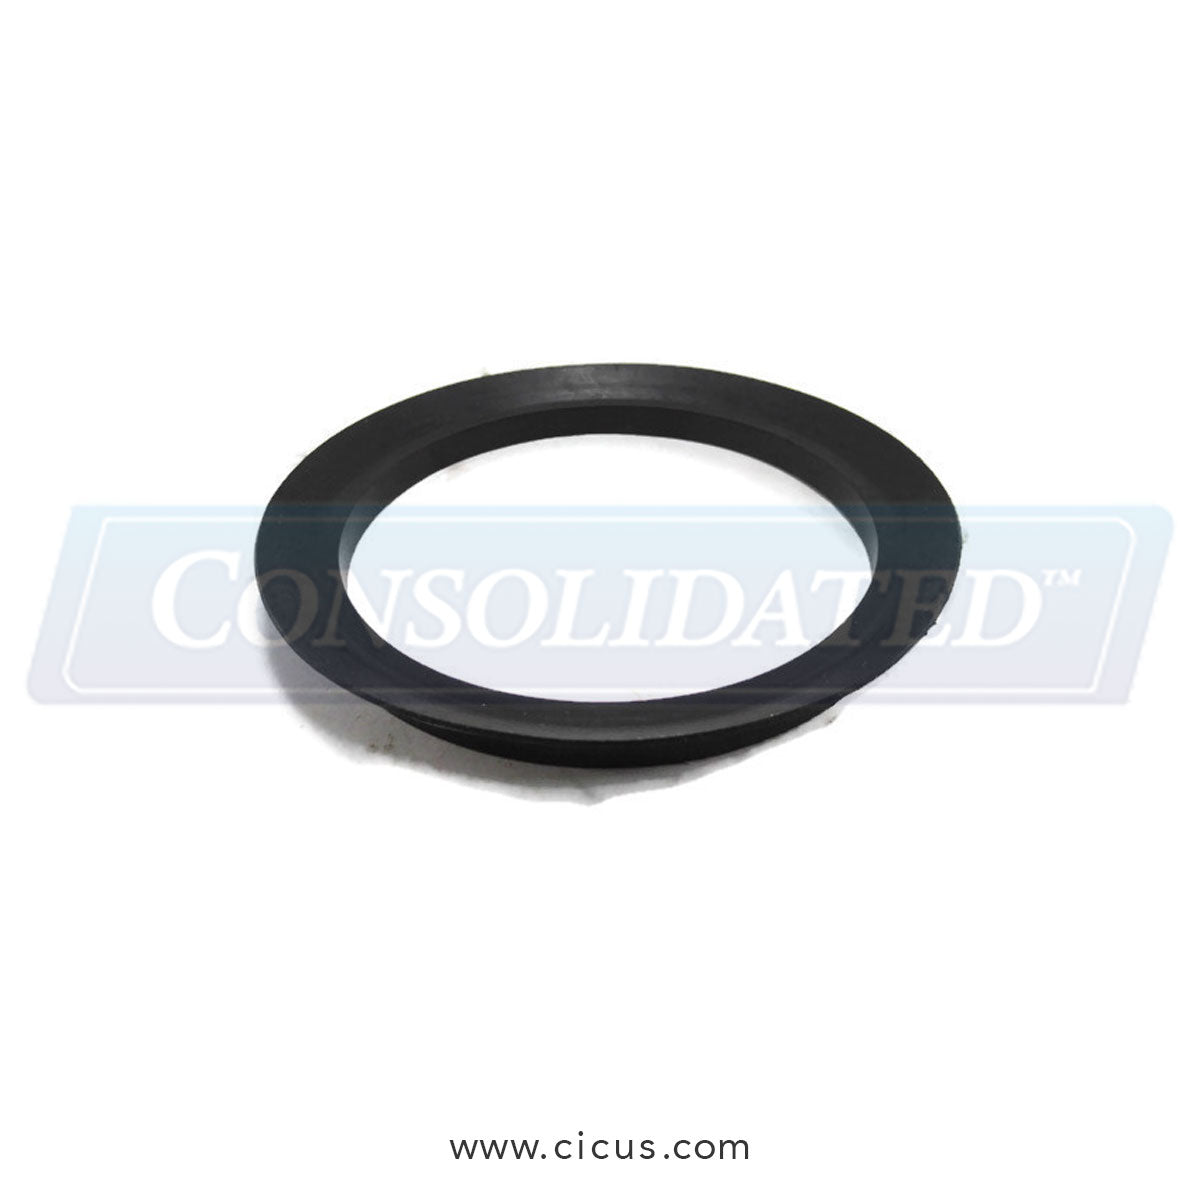 Alliance Laundry Systems Seal V Ring 110mm [F8337101]